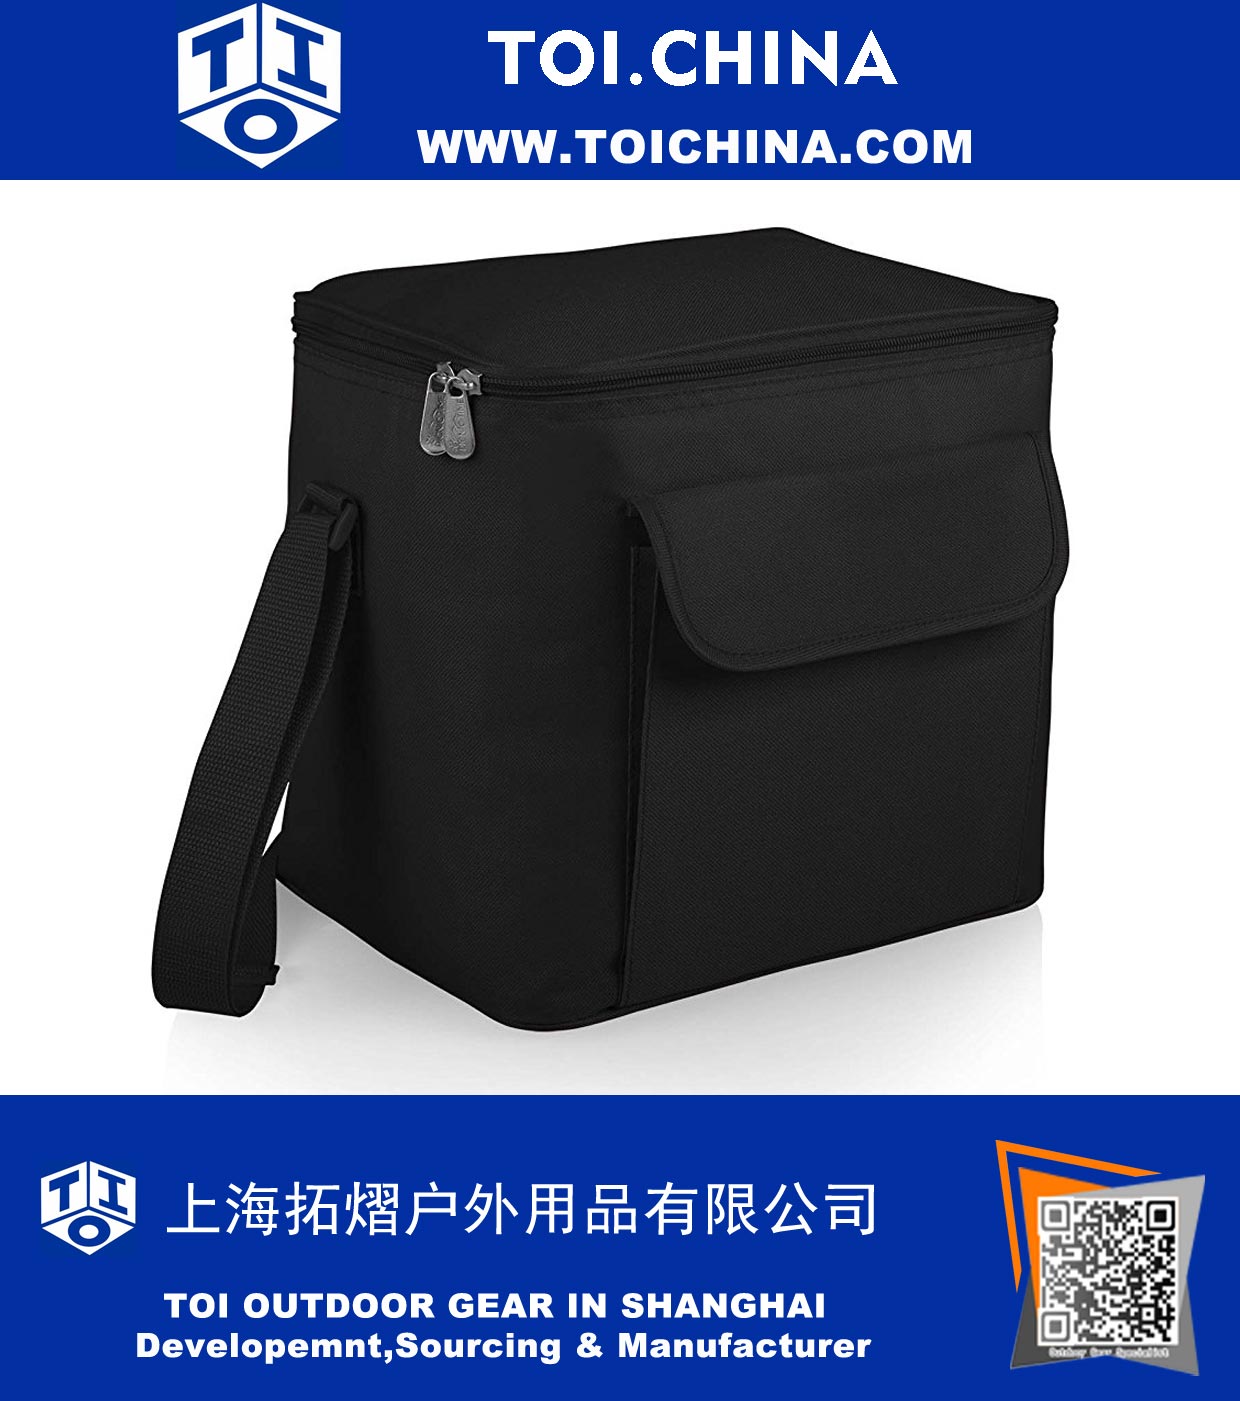 27-Can Capacity Insulated Cooler Tote